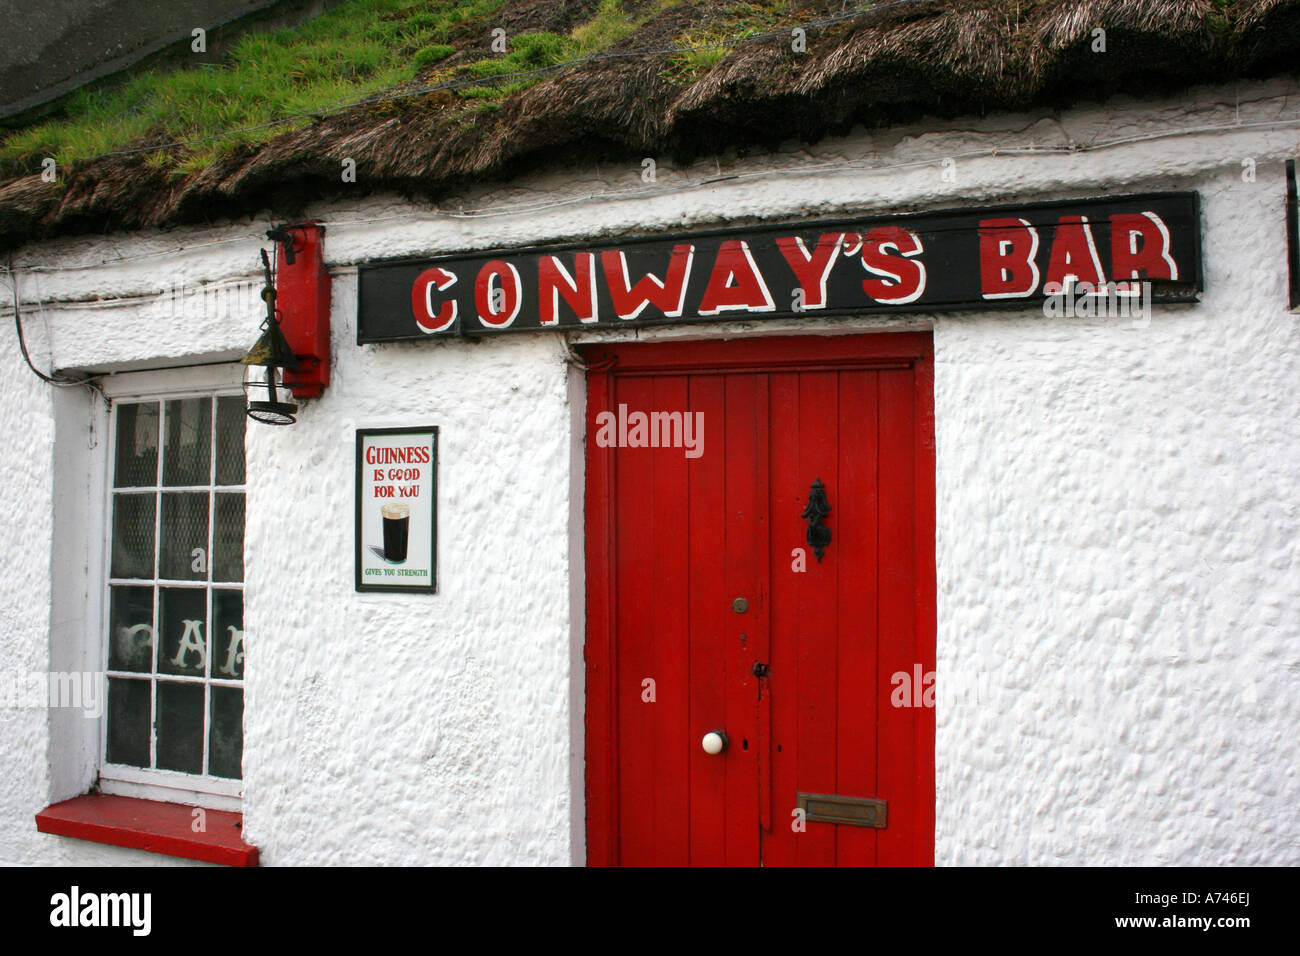 Conways Bar Traditionskneipe in Ramelton, County Donegal, Irland Stockfoto